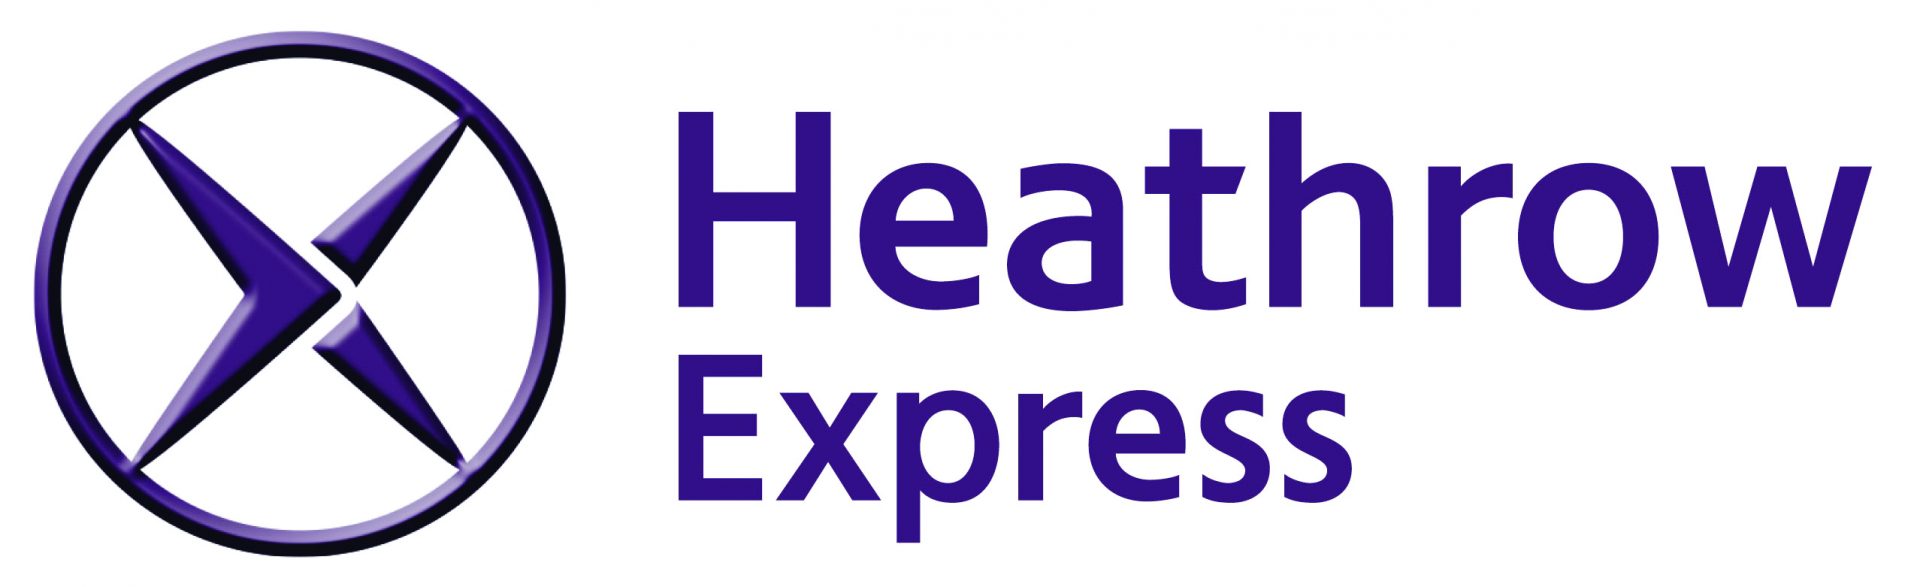 Heathrow Express and Uber offer seamless travel from plane to train and beyond Logo